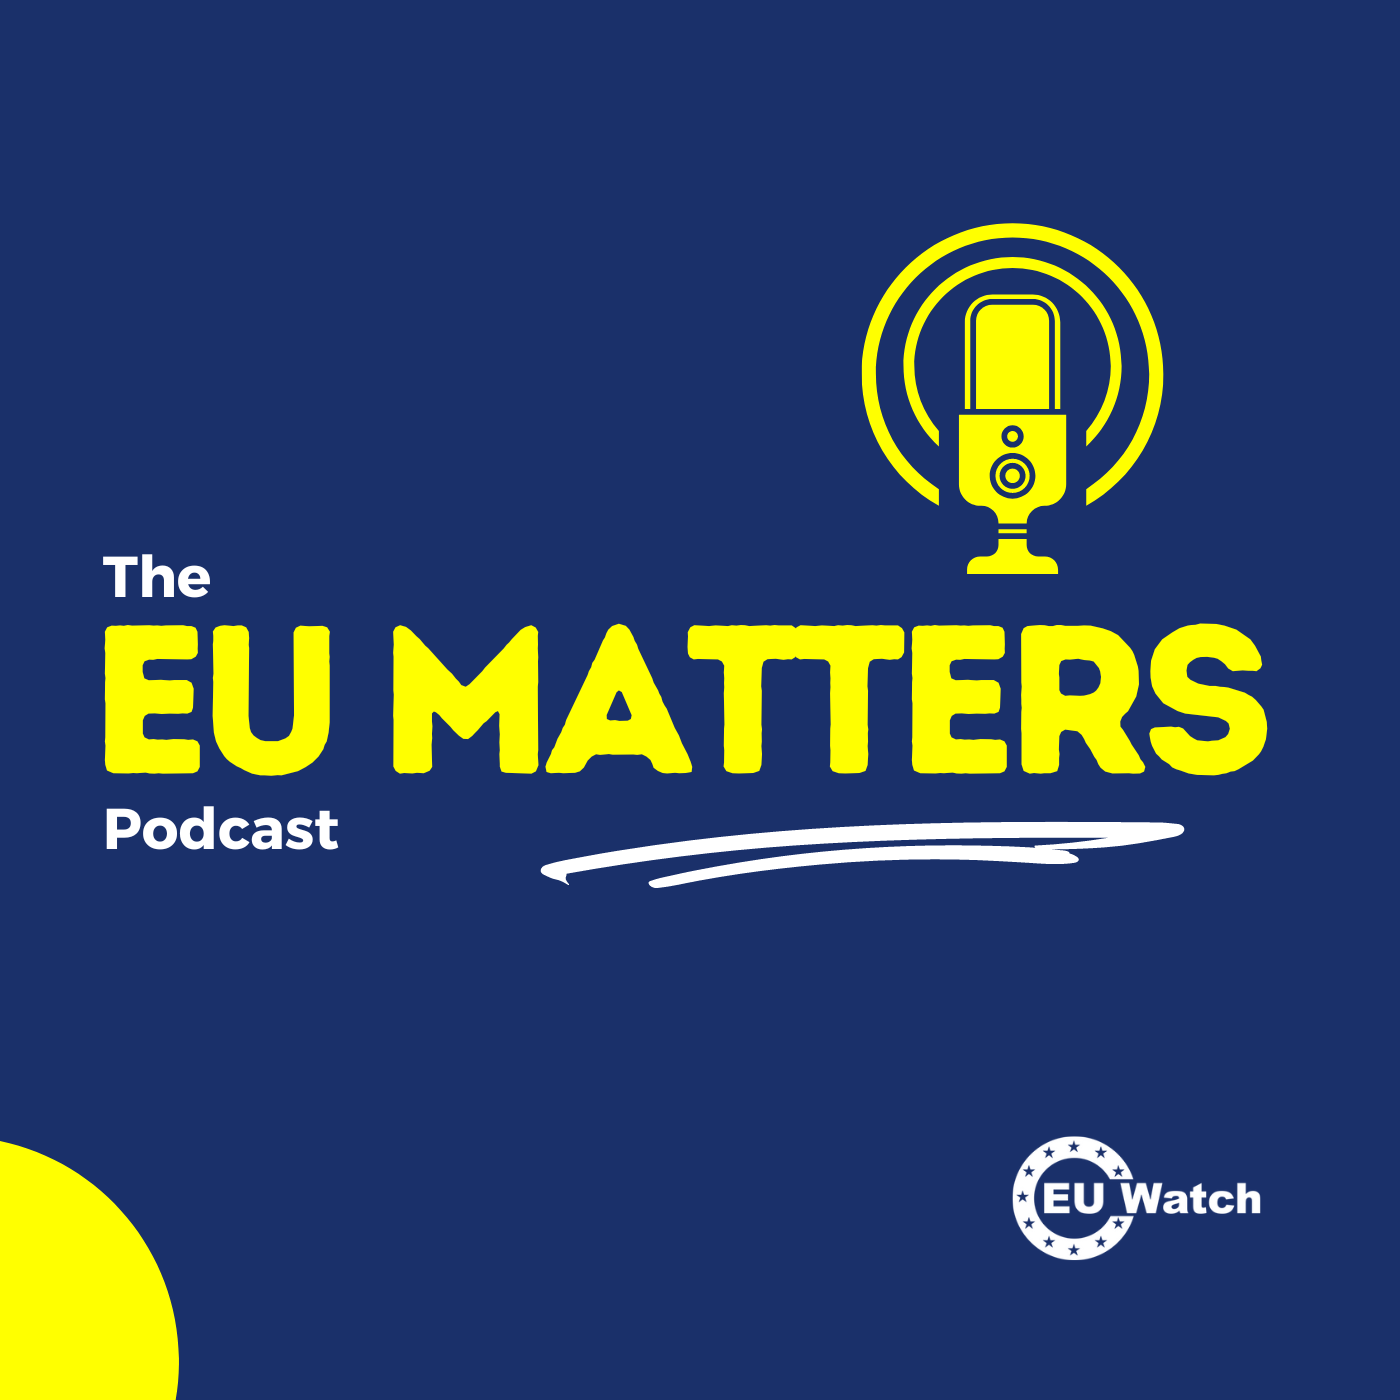 The EU Matters Podcast COVER square (1400 × 1400 px)